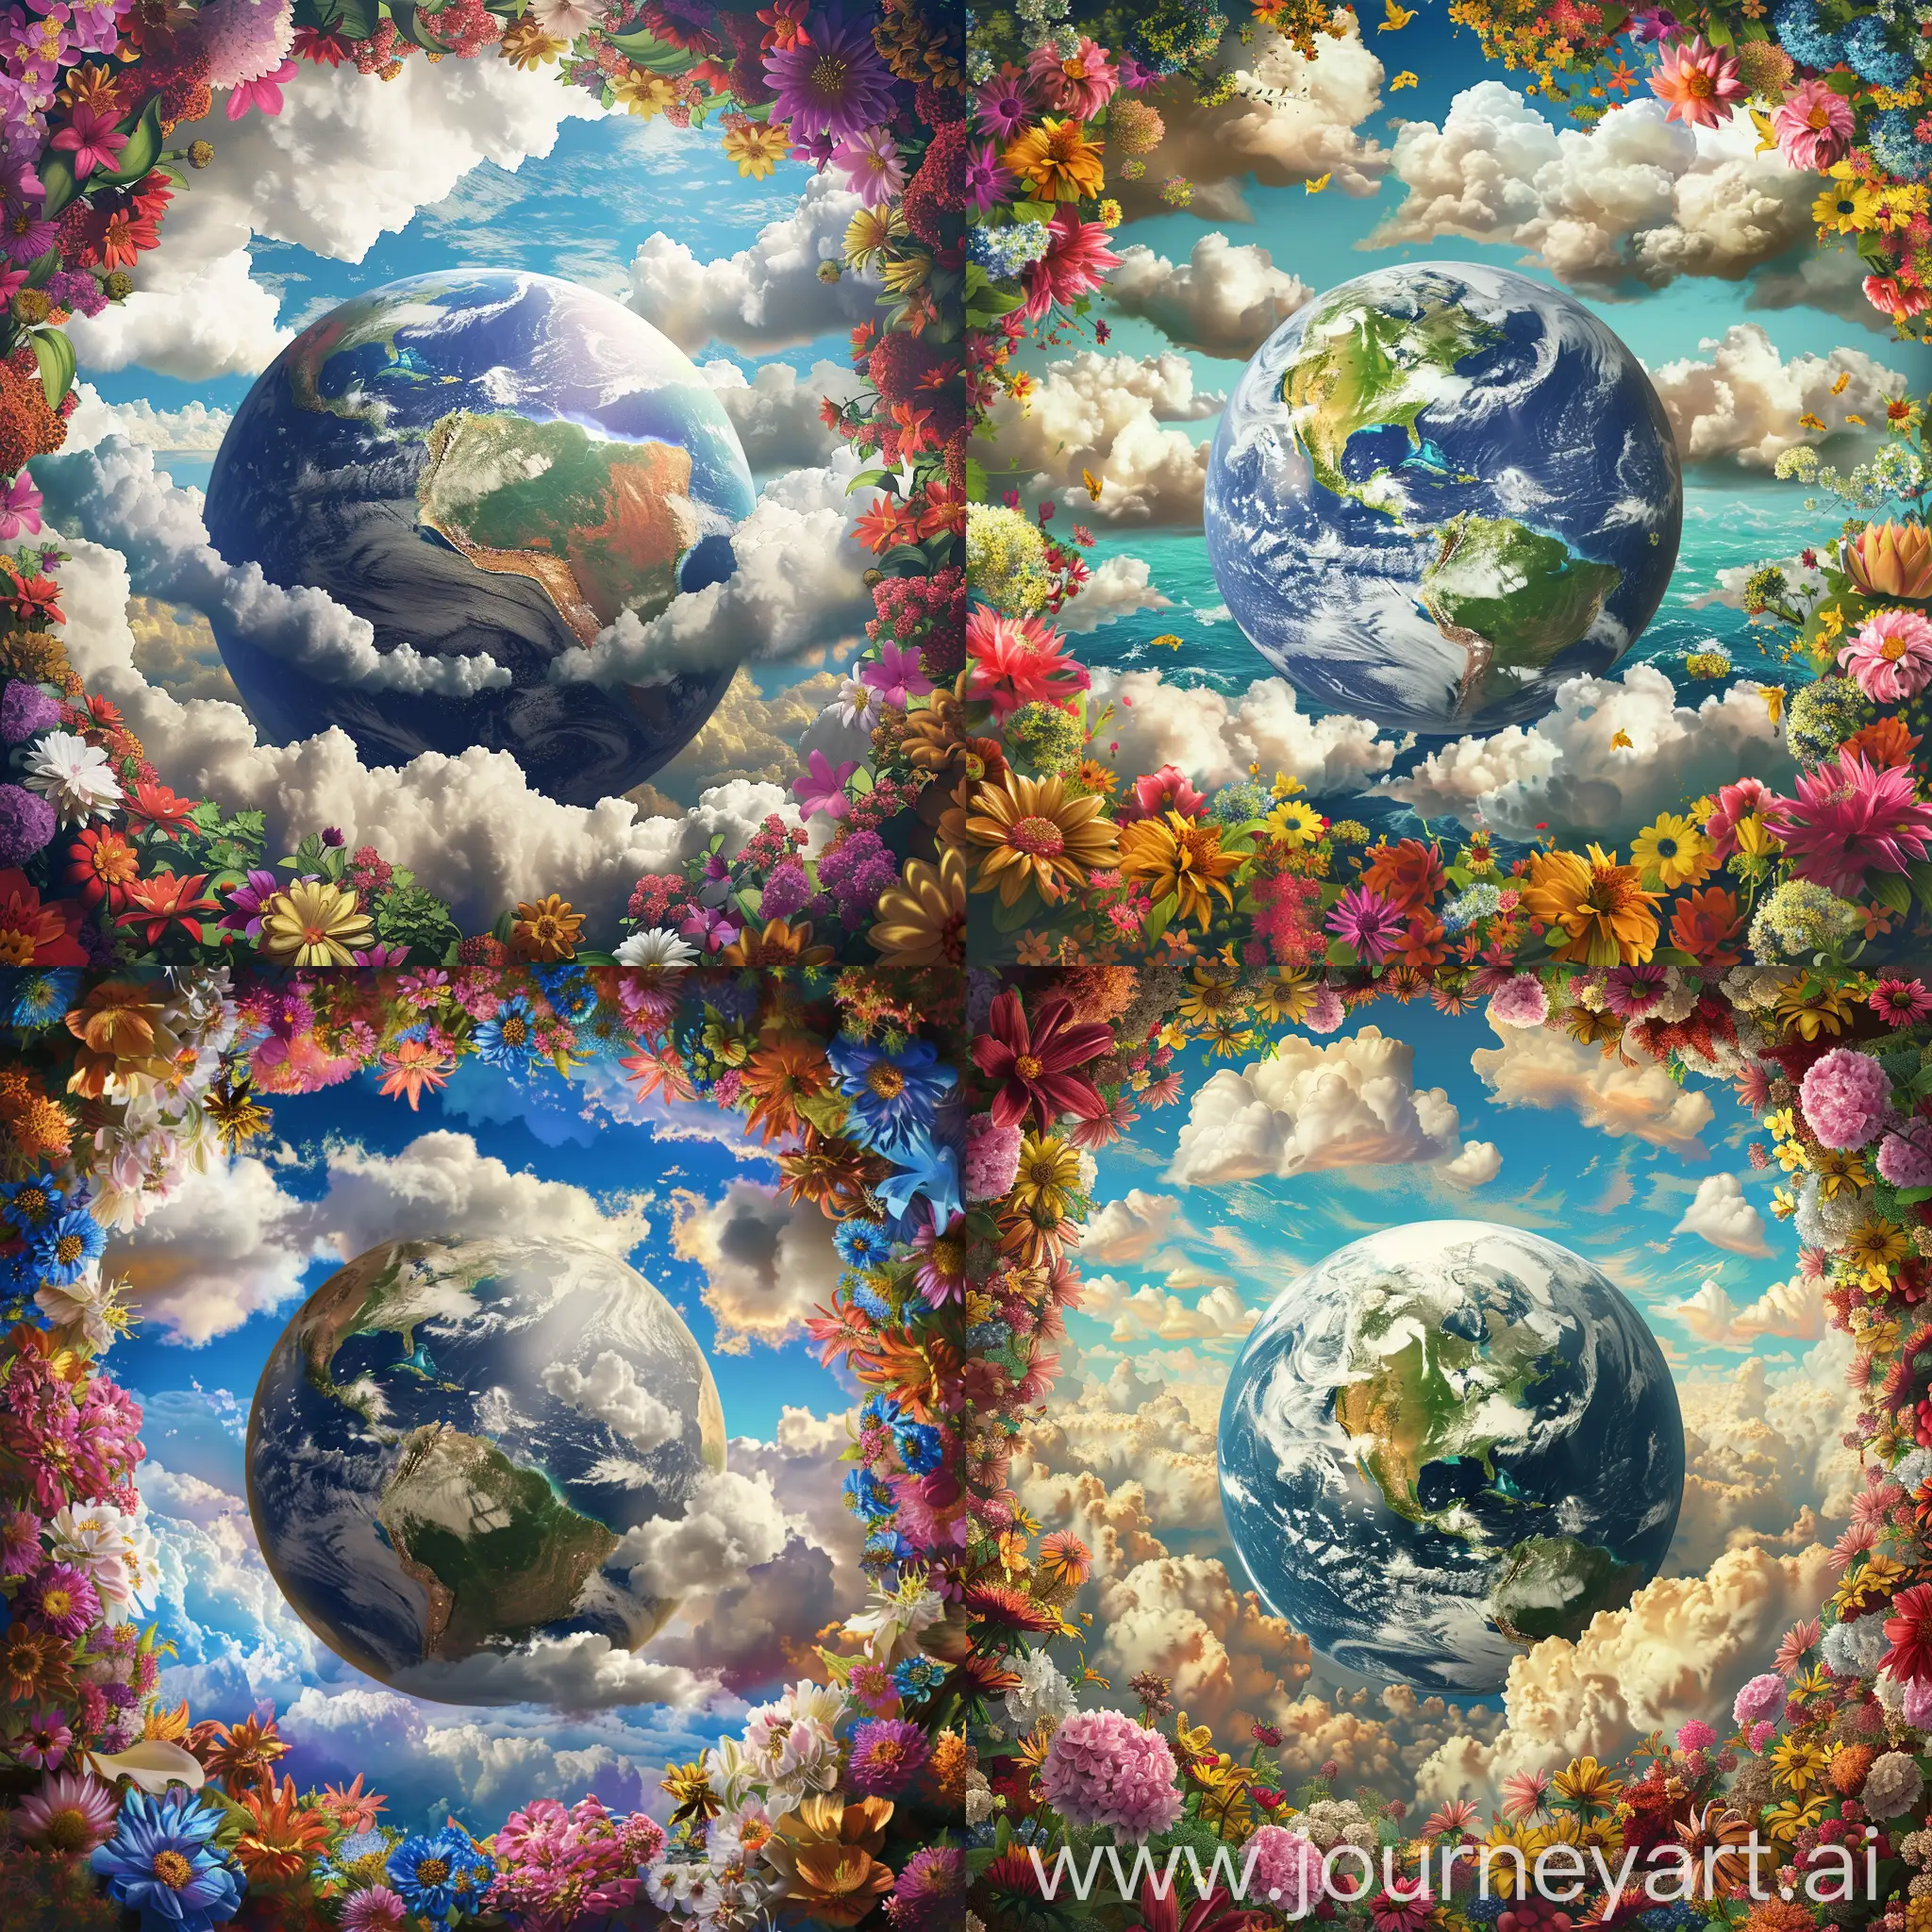 Earth-Surrounded-by-Enchanting-Flowers-Seas-and-Clouds-Digital-Painting-NFT